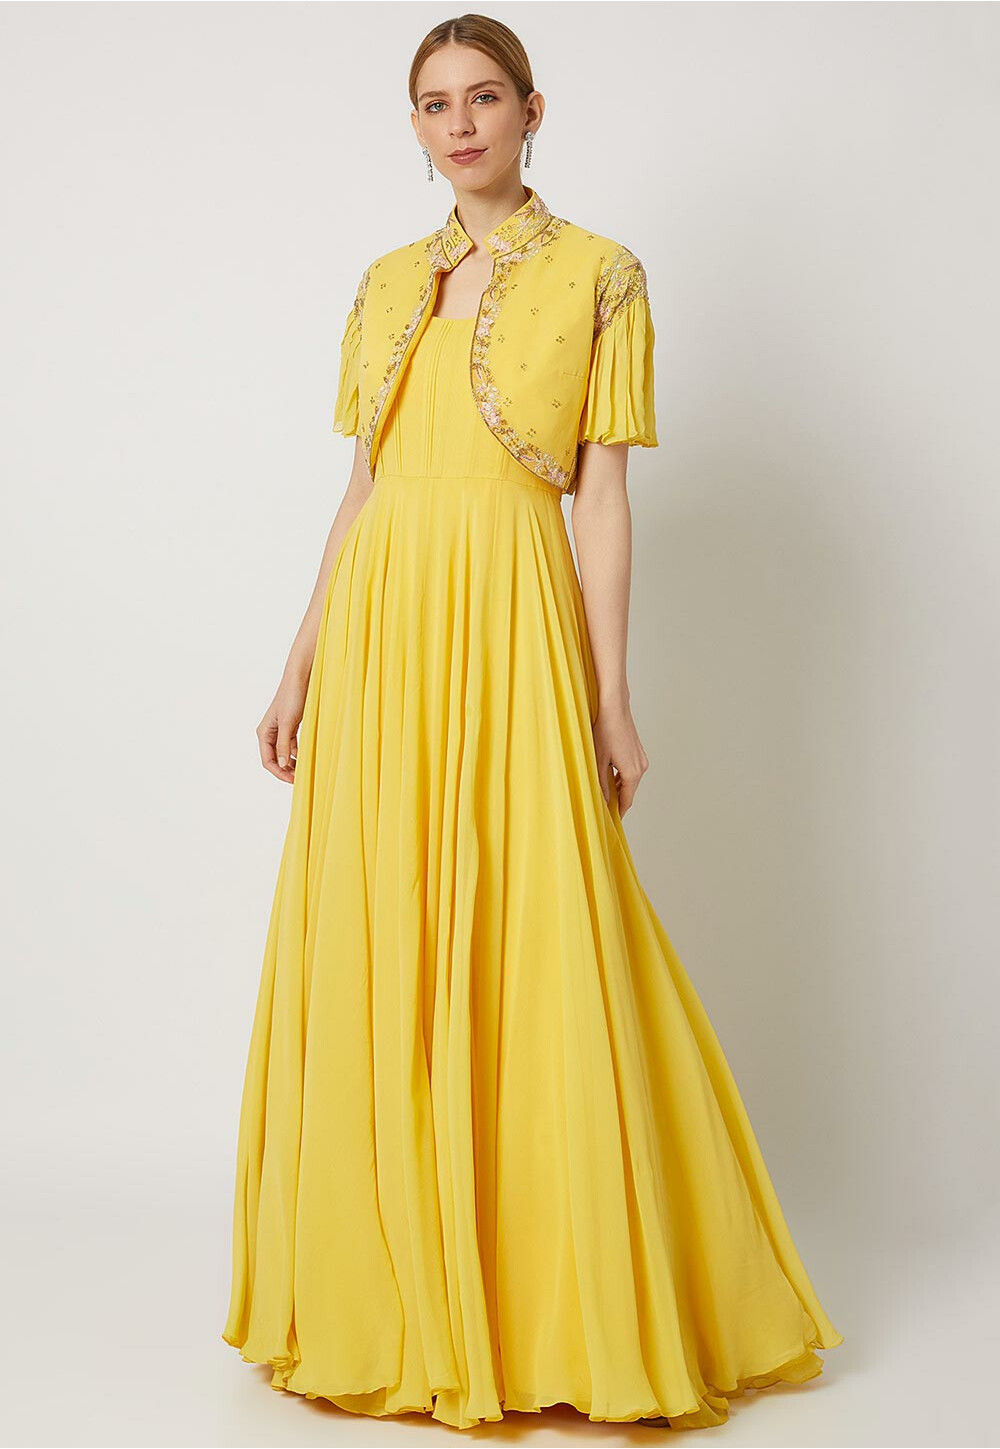 Buy RONAK FASHION POINT Gown with Printed Beautiful Jacket Yellow Gown (L)  at Amazon.in